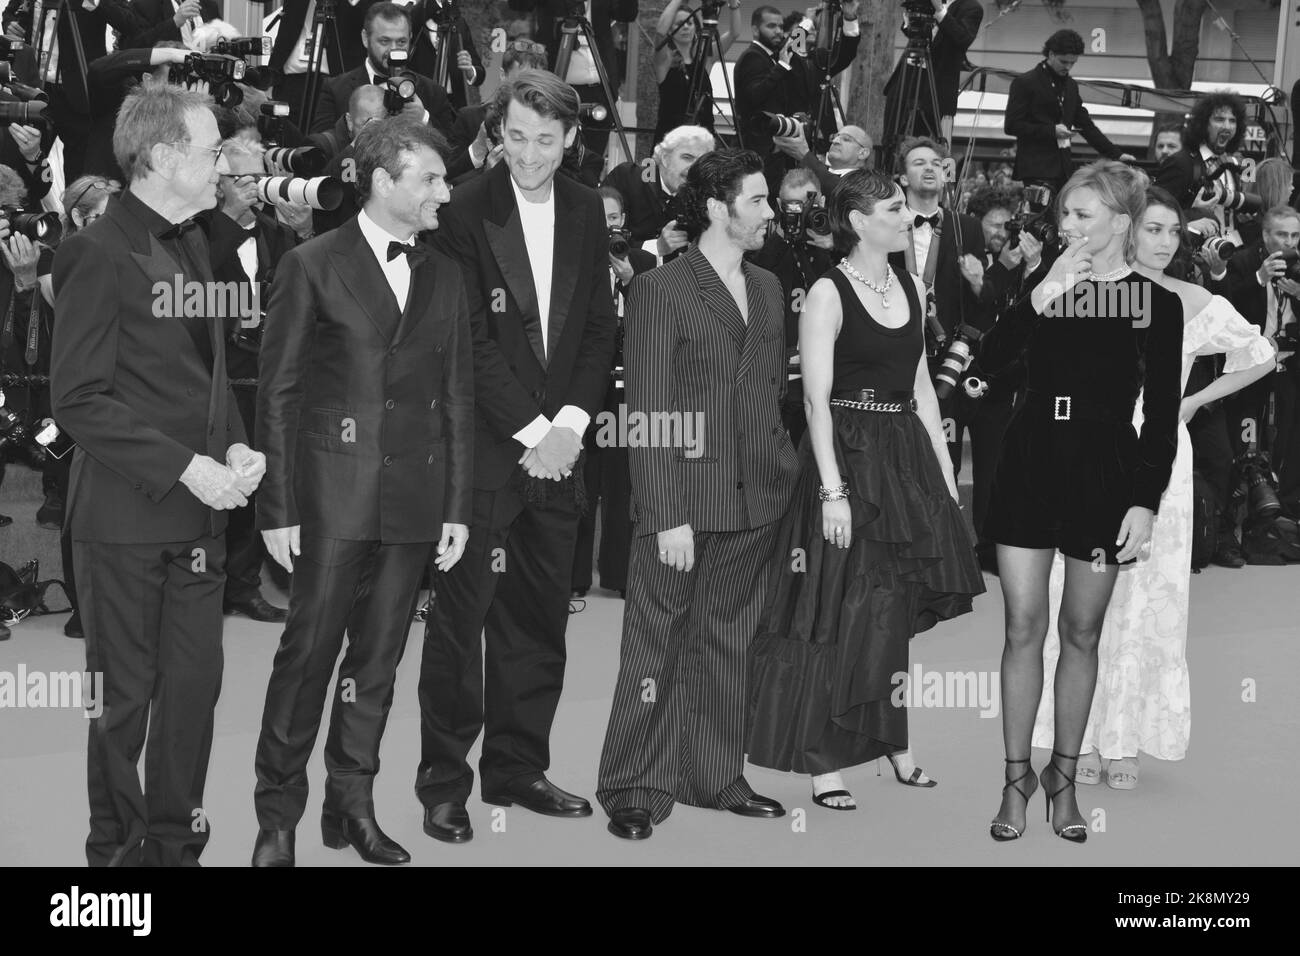 L'equipaggio del film 'Don Juan': Alain Chamfort, Serge Bozon, Damien Chapelle, Tahar Rahim, Jehnny Beth, Virginie Efira, Louise Ribière 'Les amandiers' ('Forever Young') Cannes Film Festival Screening 75th Cannes Film Festival 22 maggio 2022 Foto Stock